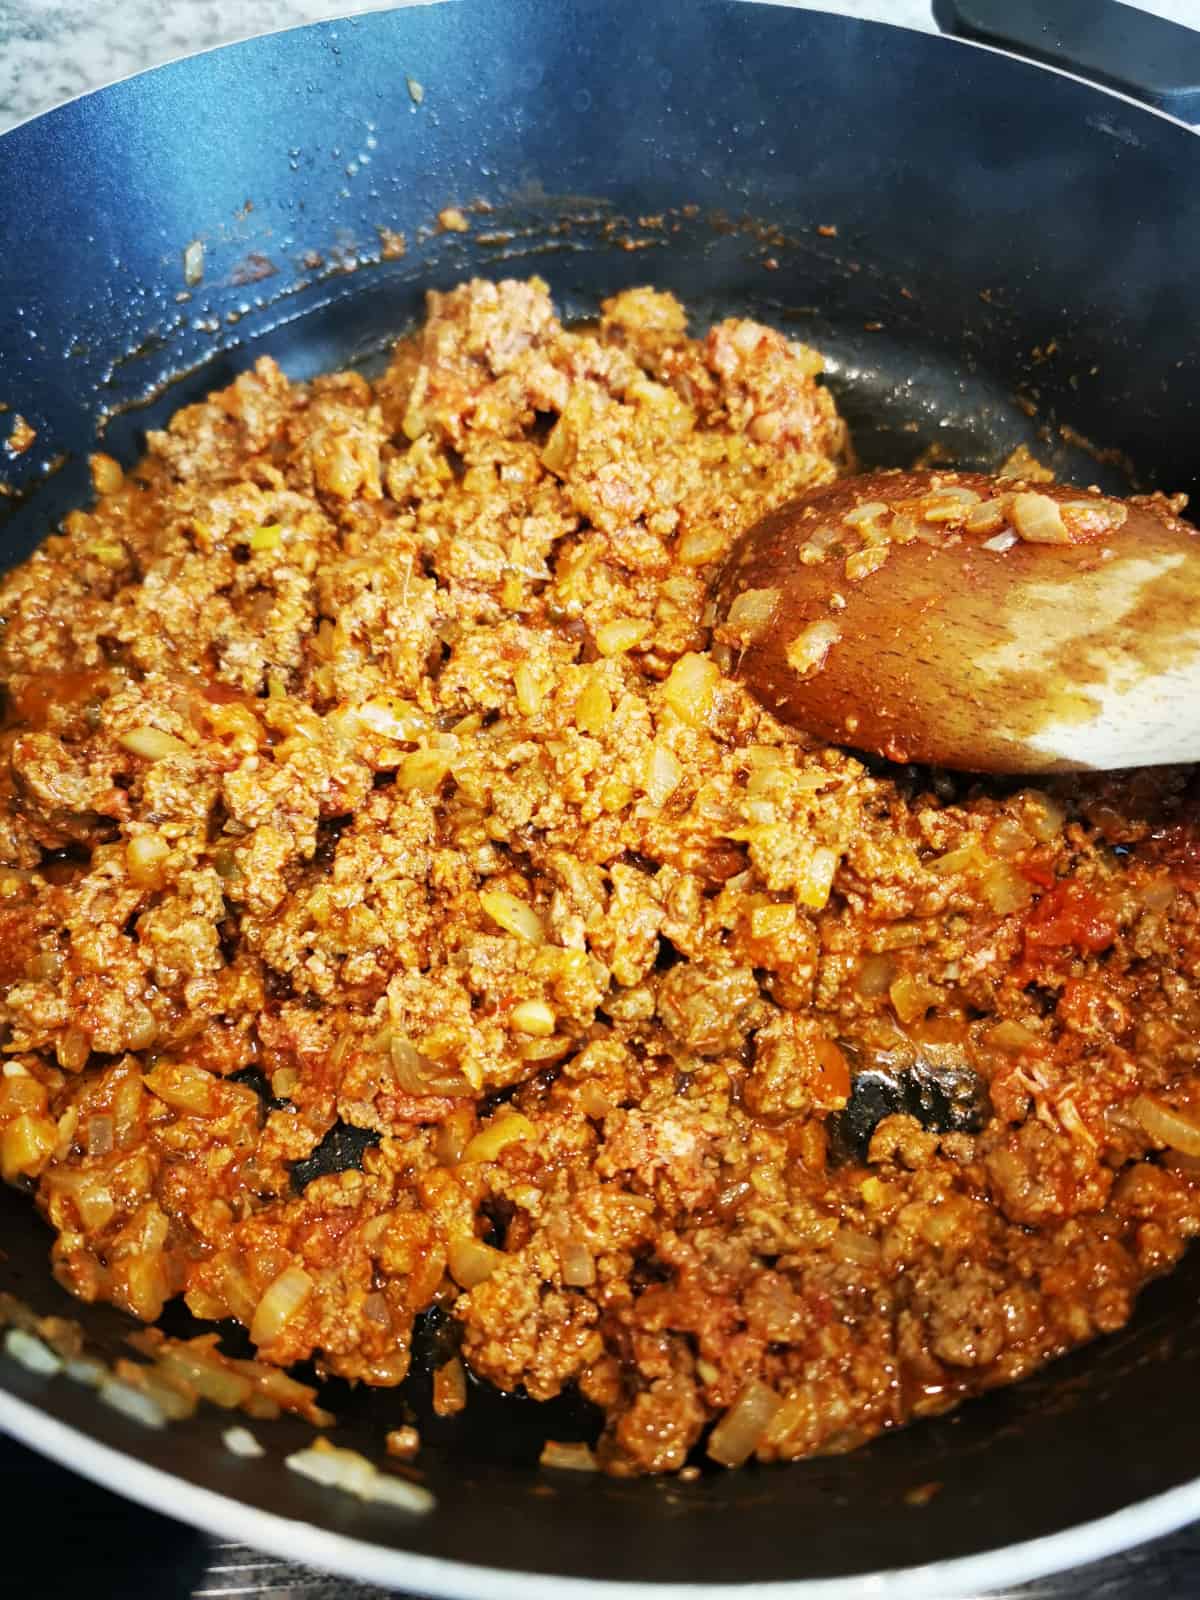 seasoned ground beef sauteed in a skillet with a wooden spatula.